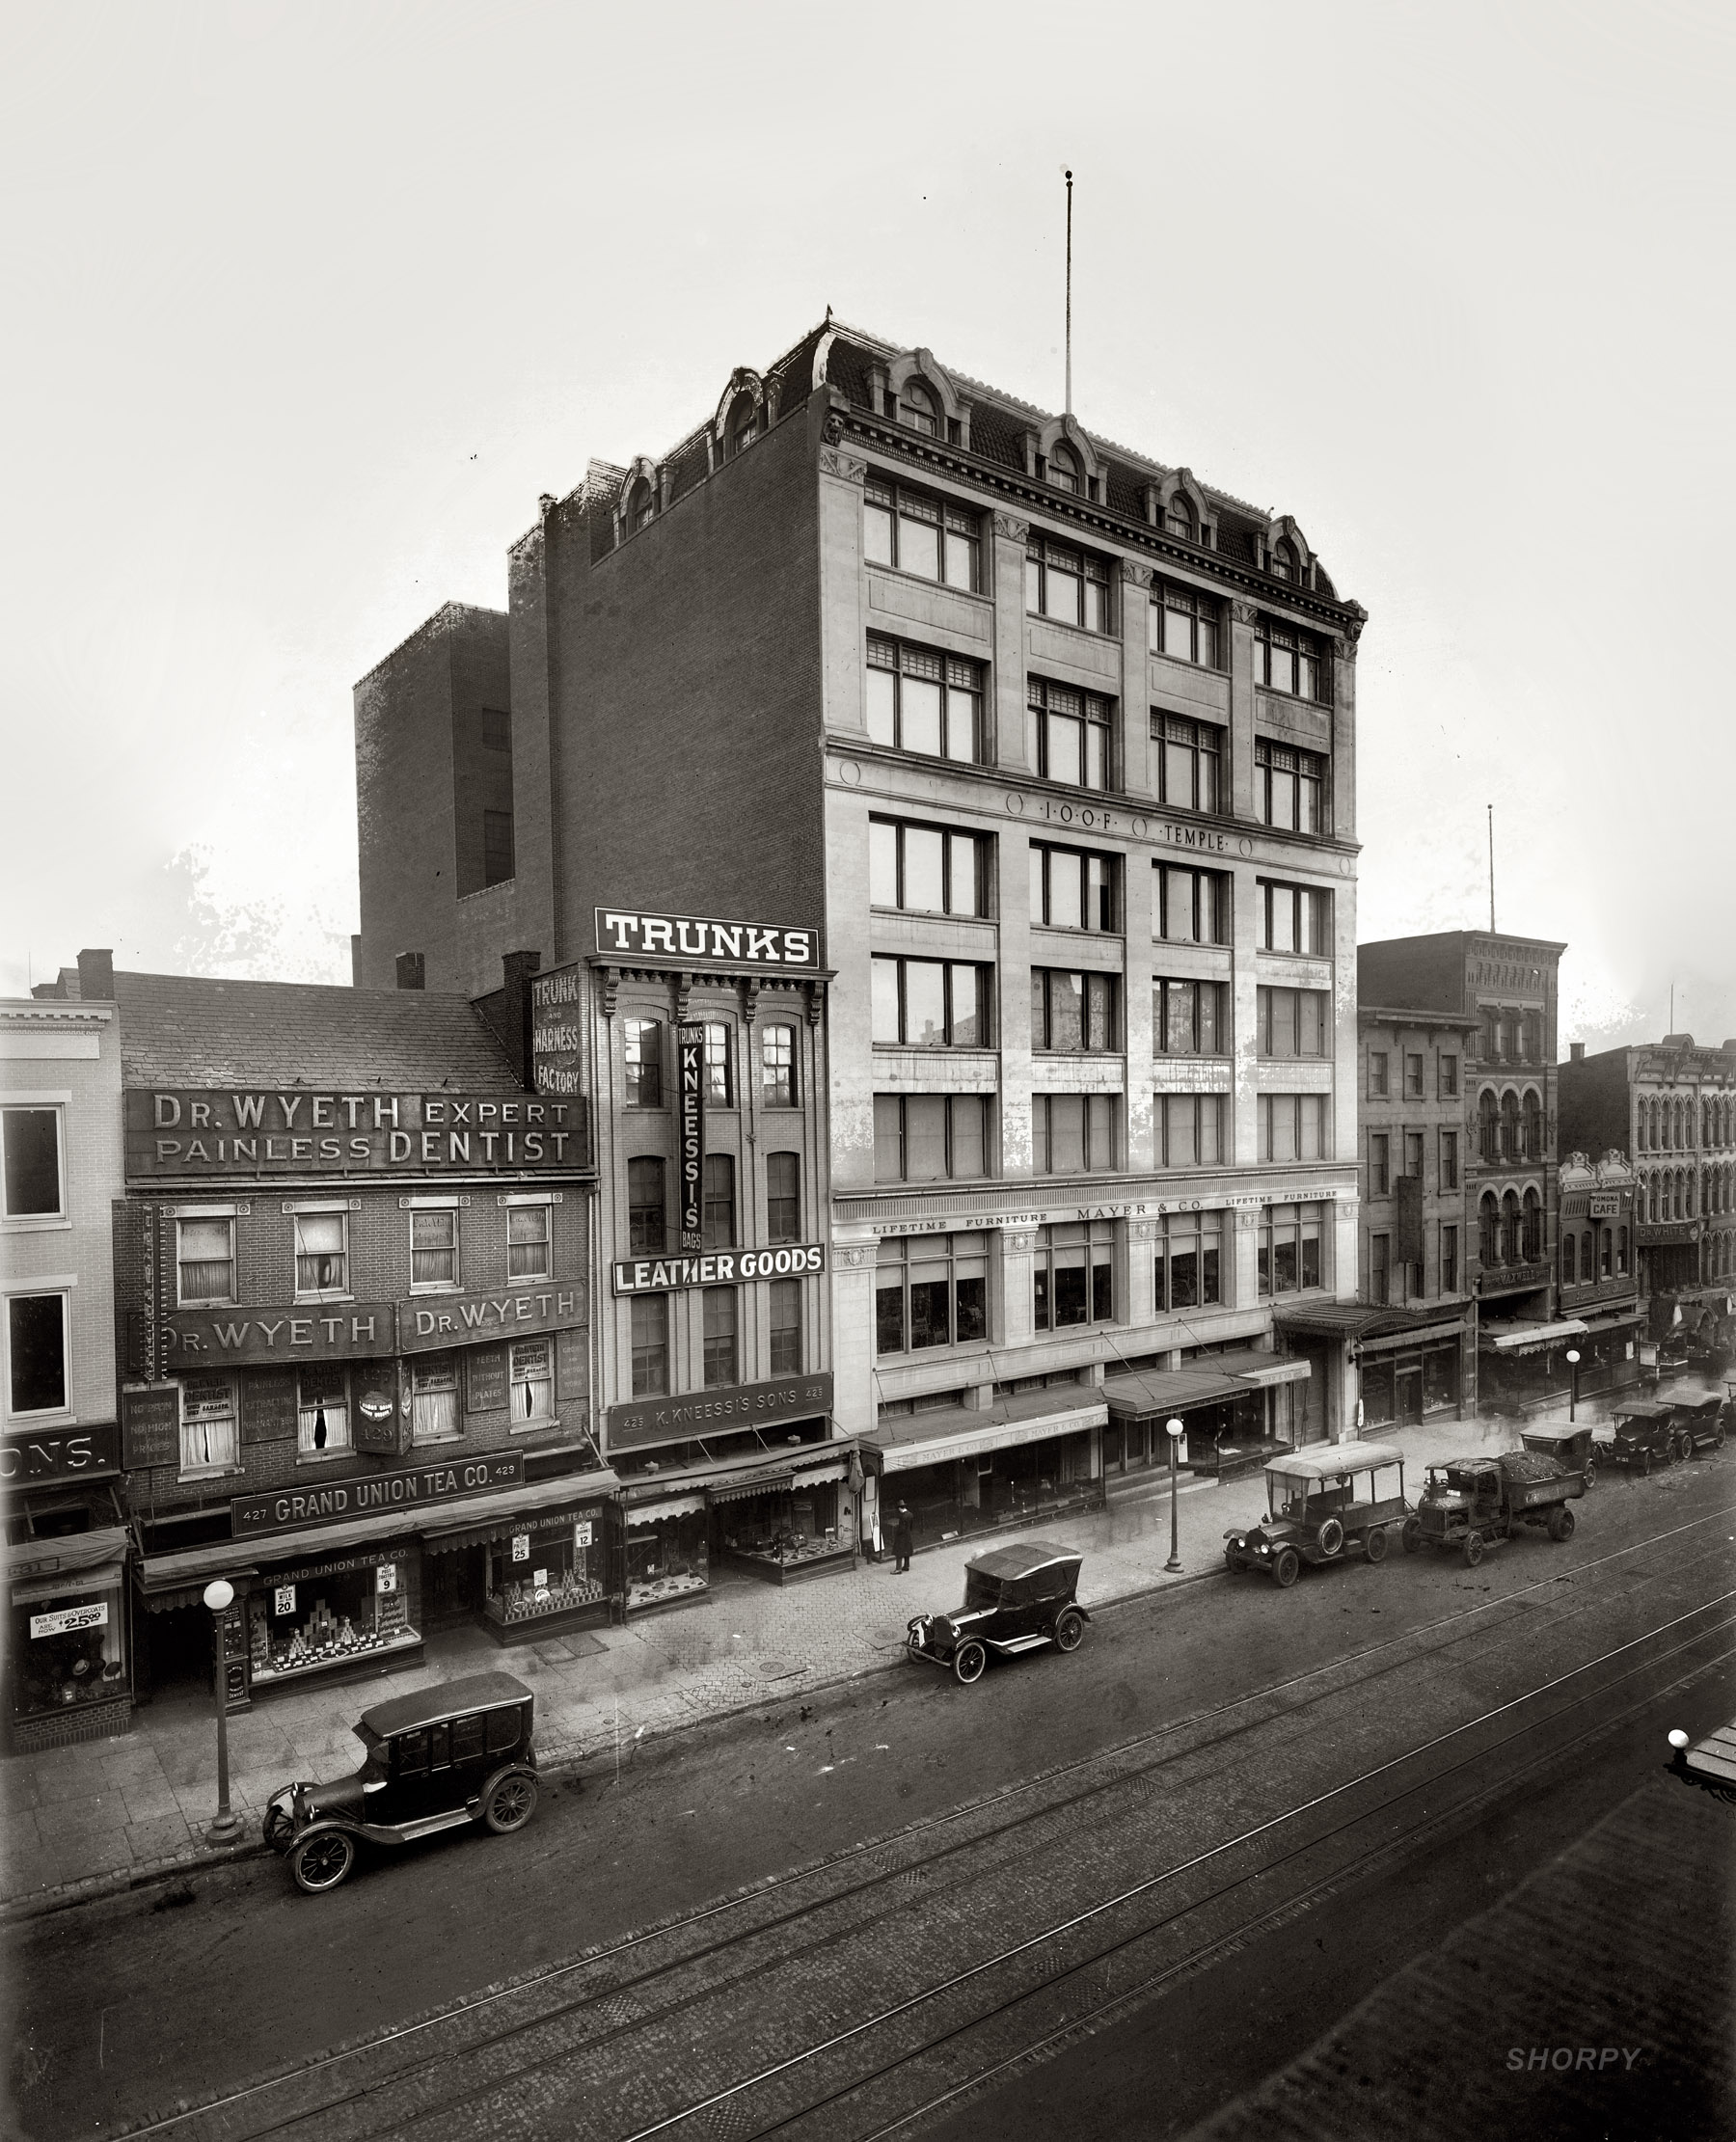 Washington, 1921 or 1922. "Mayer & Co." The Mayer furniture store in the Independent Order of Odd Fellows Temple at 419-423 Seventh Street N.W. between D and E. National Photo Company glass negative. View full size.